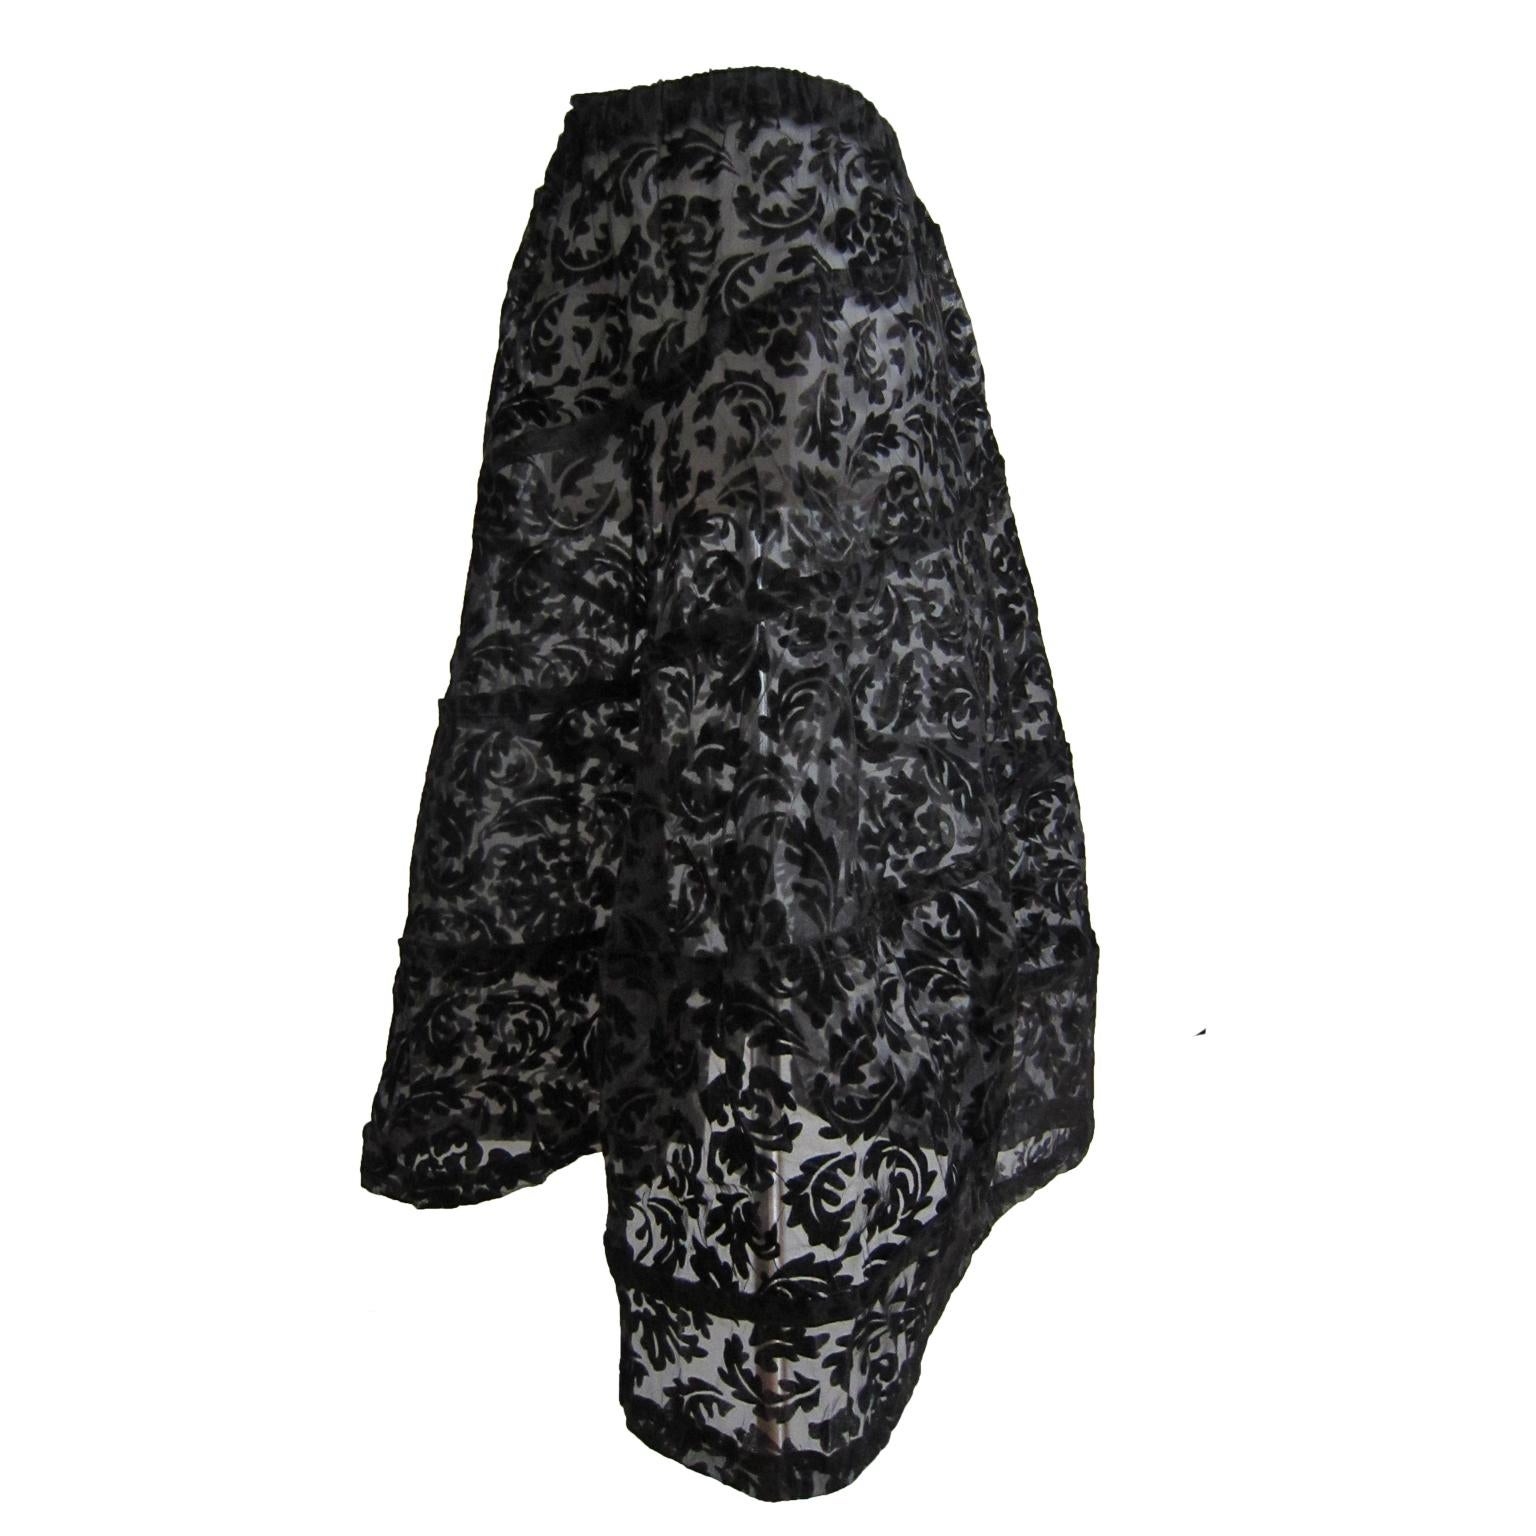 COMME des GARCONS tricot black flair sheer skirt with floral damage flock technic.
Stitched together spirally. Three-dimensional flare silhouette with volume. Elastic waist.
Free size 
Fits like 36 - 38 (EU), Medium
Length : circa 75 cm